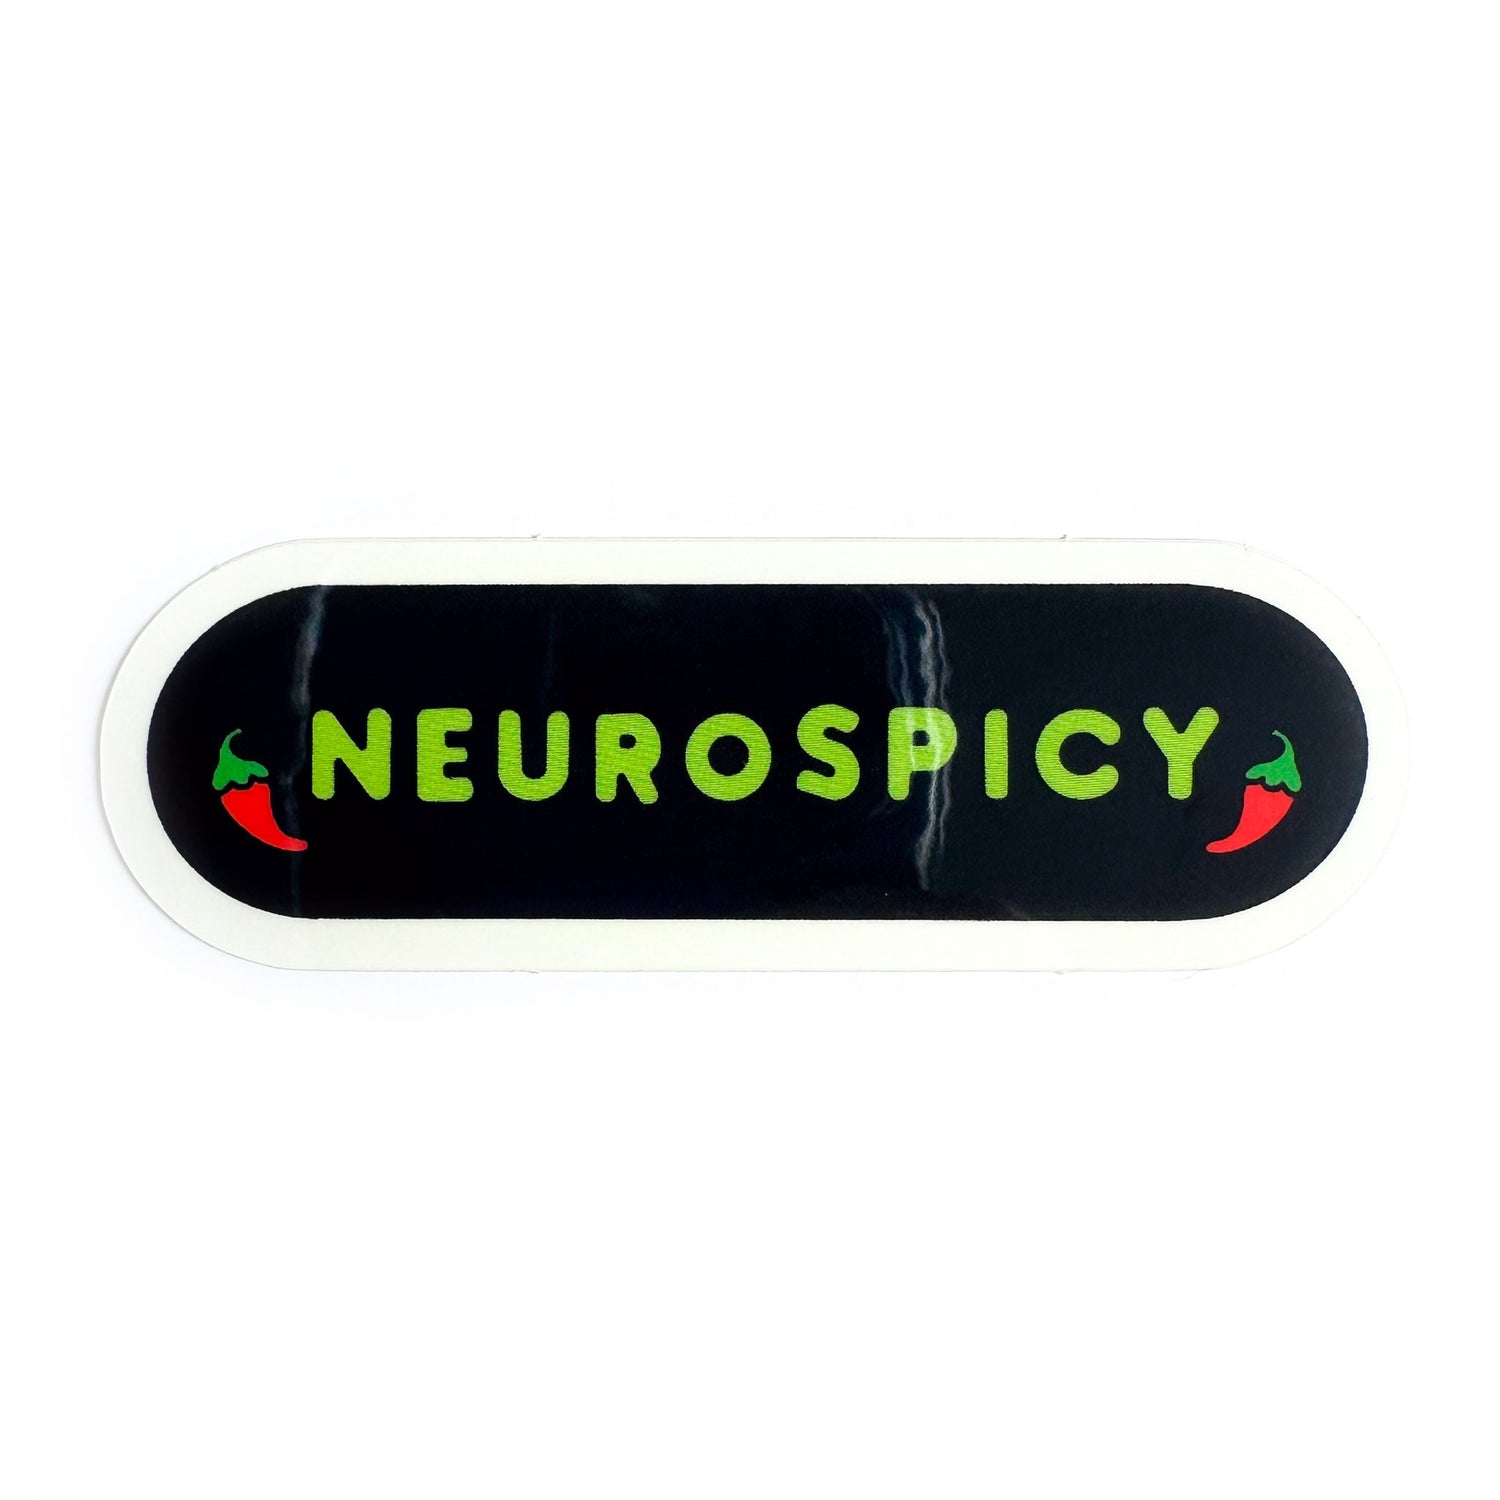 A black oval sticker with the word "neurospicy" on it with little chili pepper illustrations framing it. 